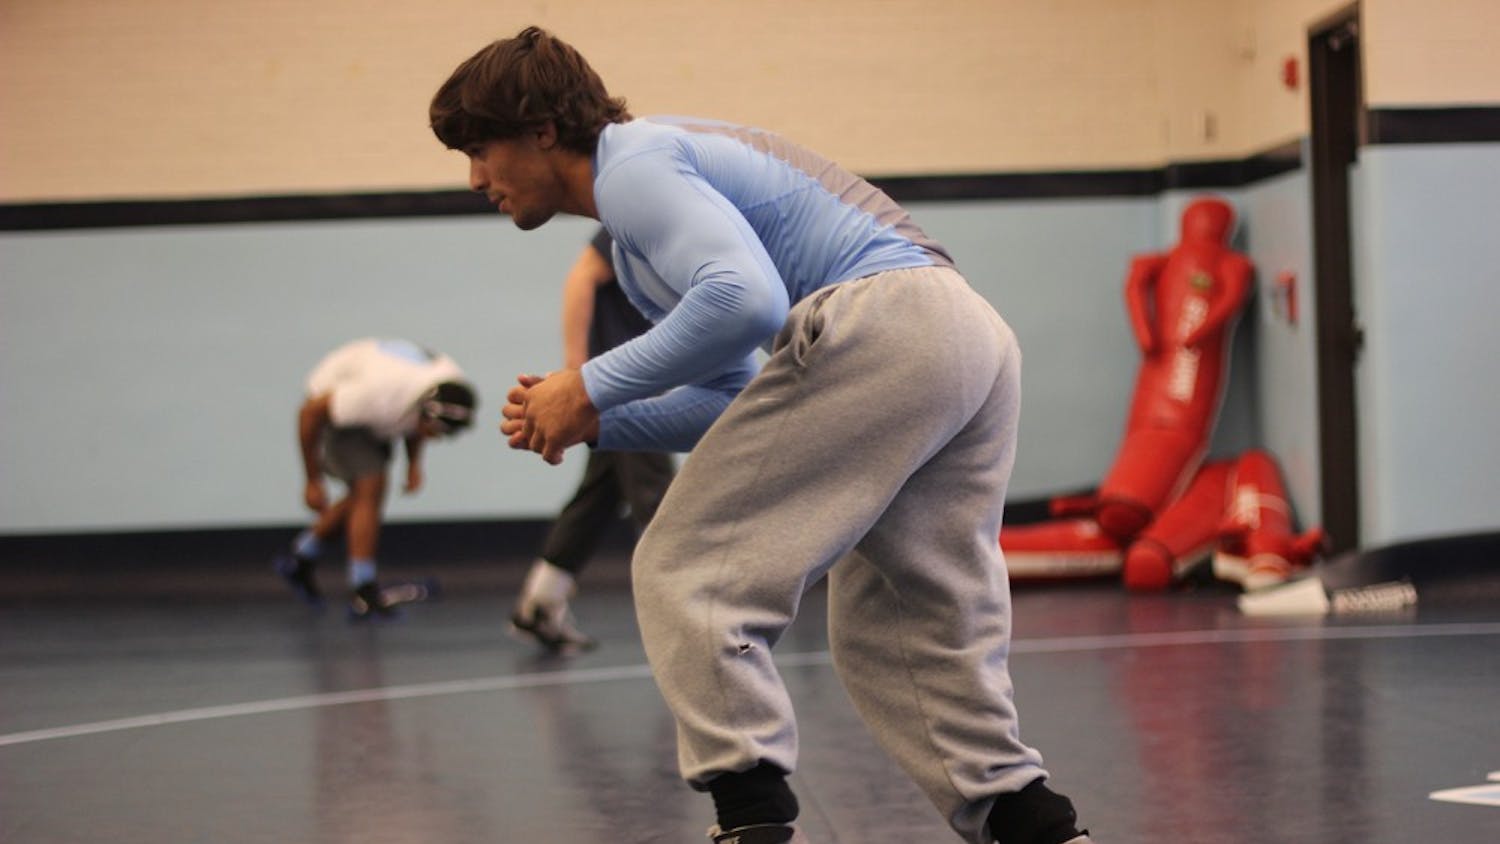 Ethan Ramos is a redshirt junior is a top wrestler for UNC and earned All-American honors during the 2014-15 season.  